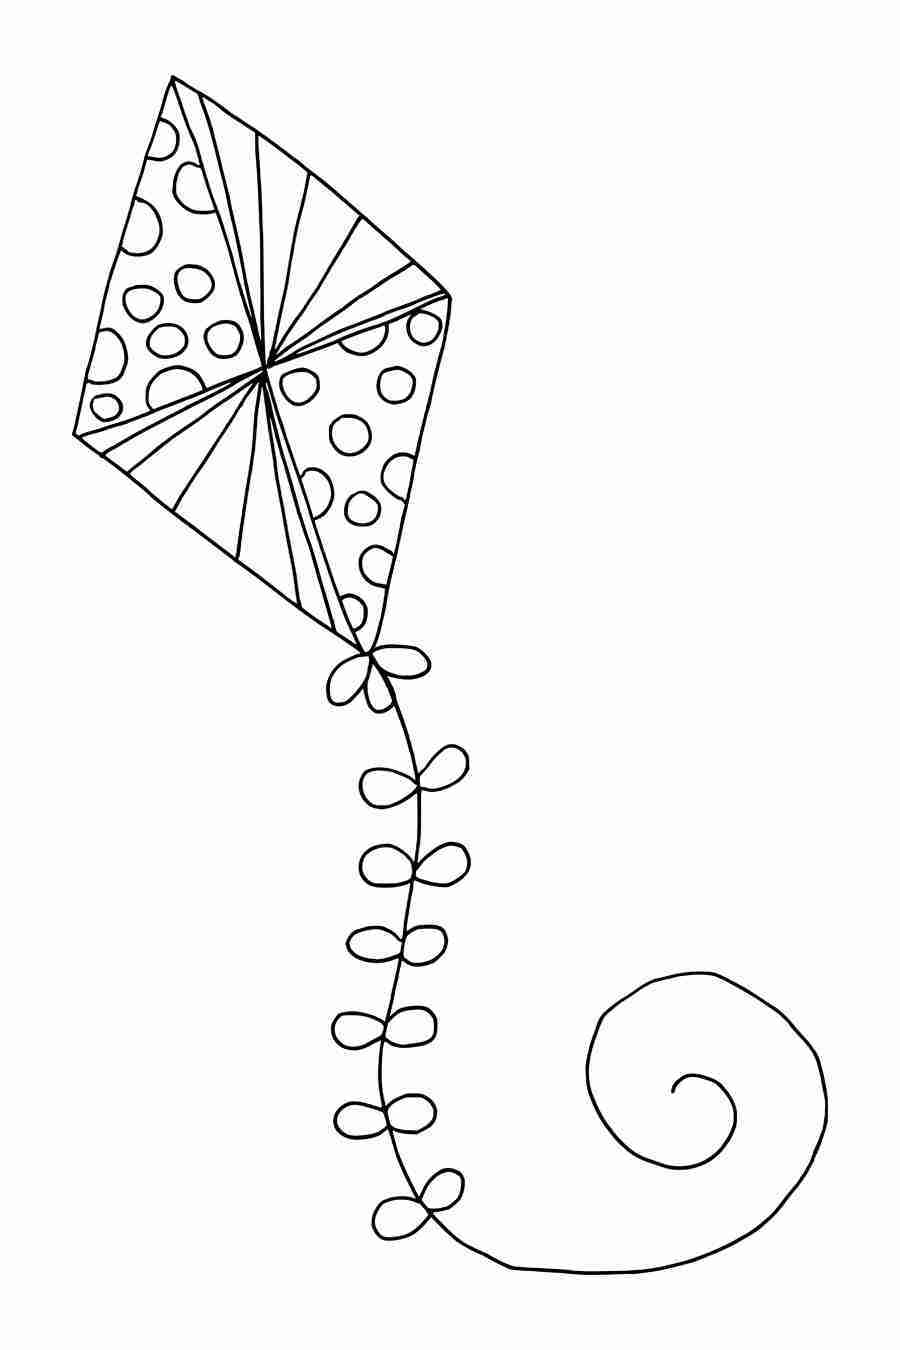 kite-coloring-page-at-getcolorings-free-printable-colorings-pages